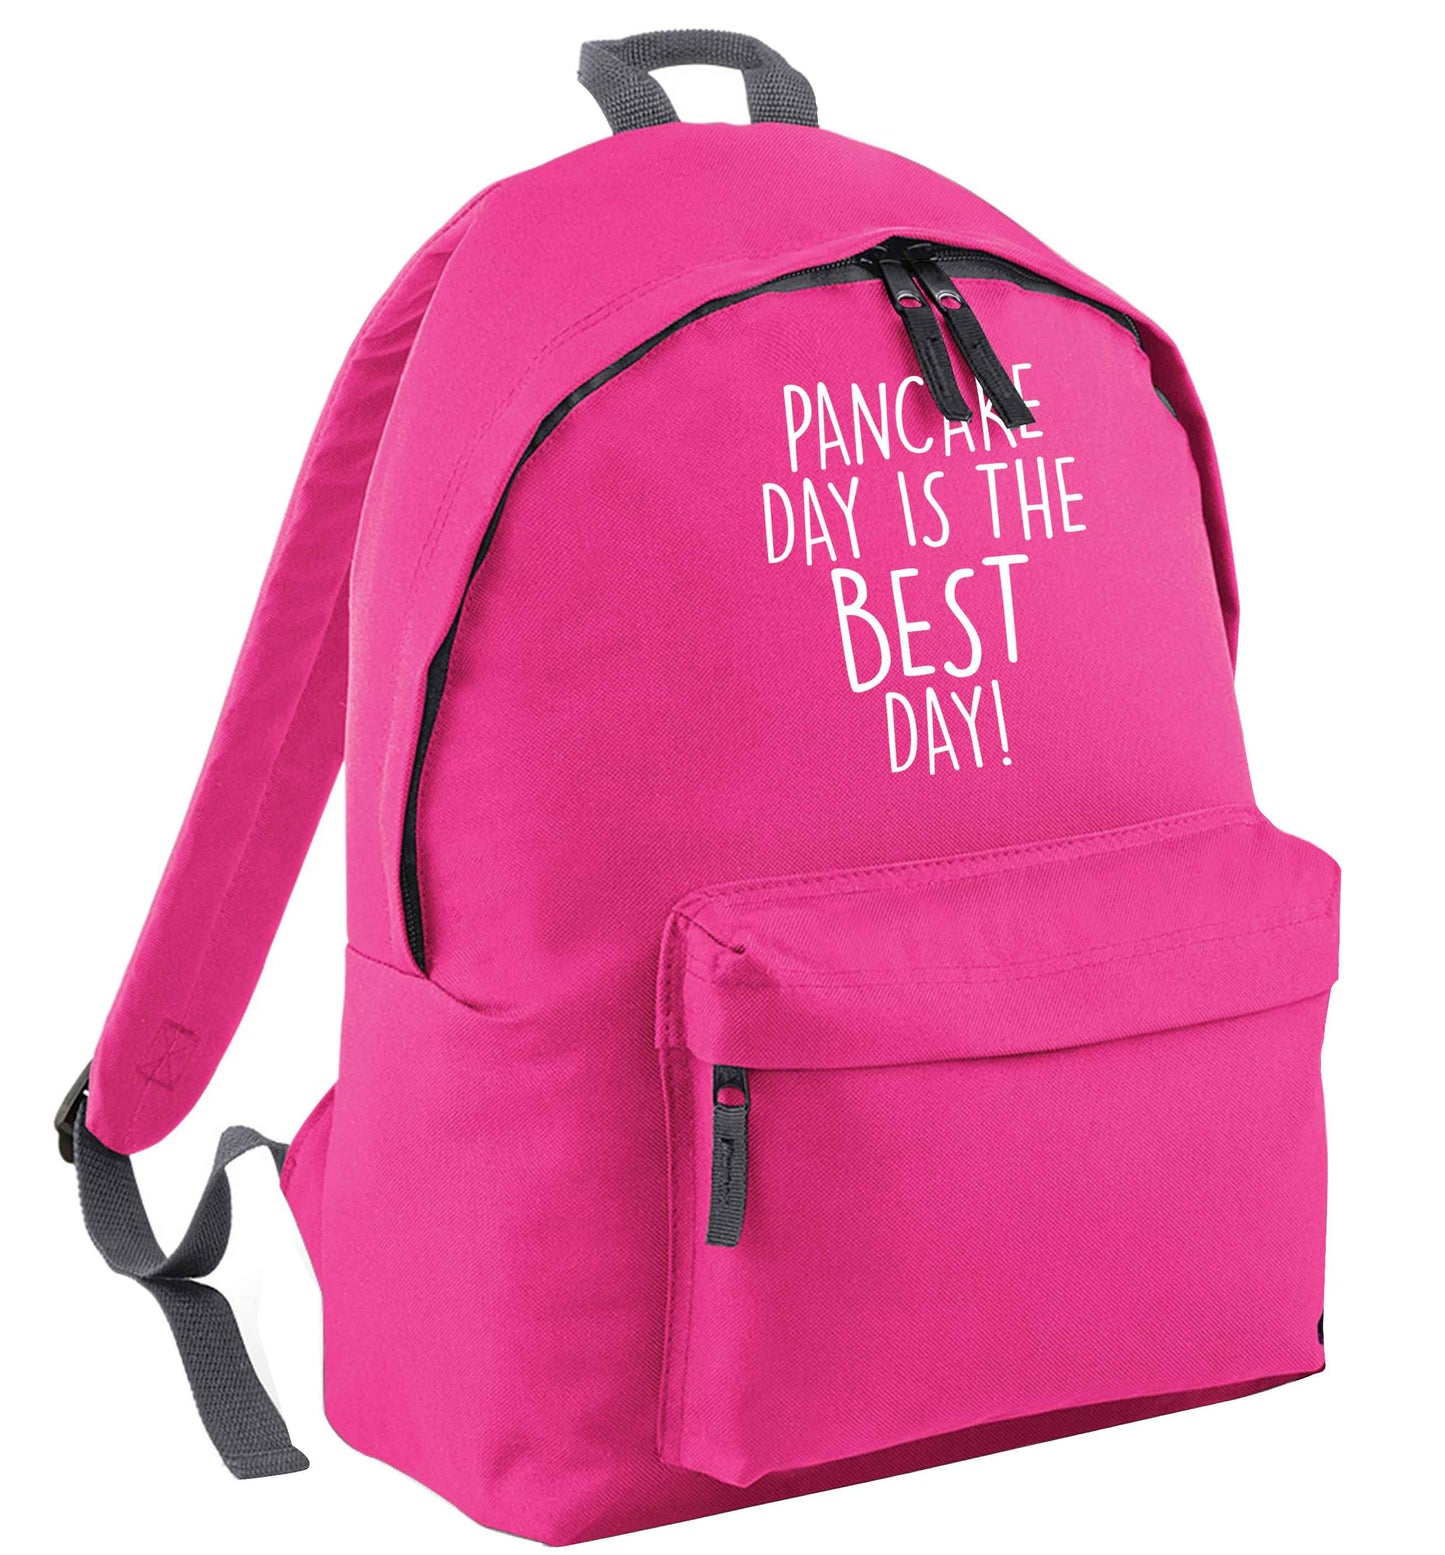 Pancake day is the best day pink childrens backpack